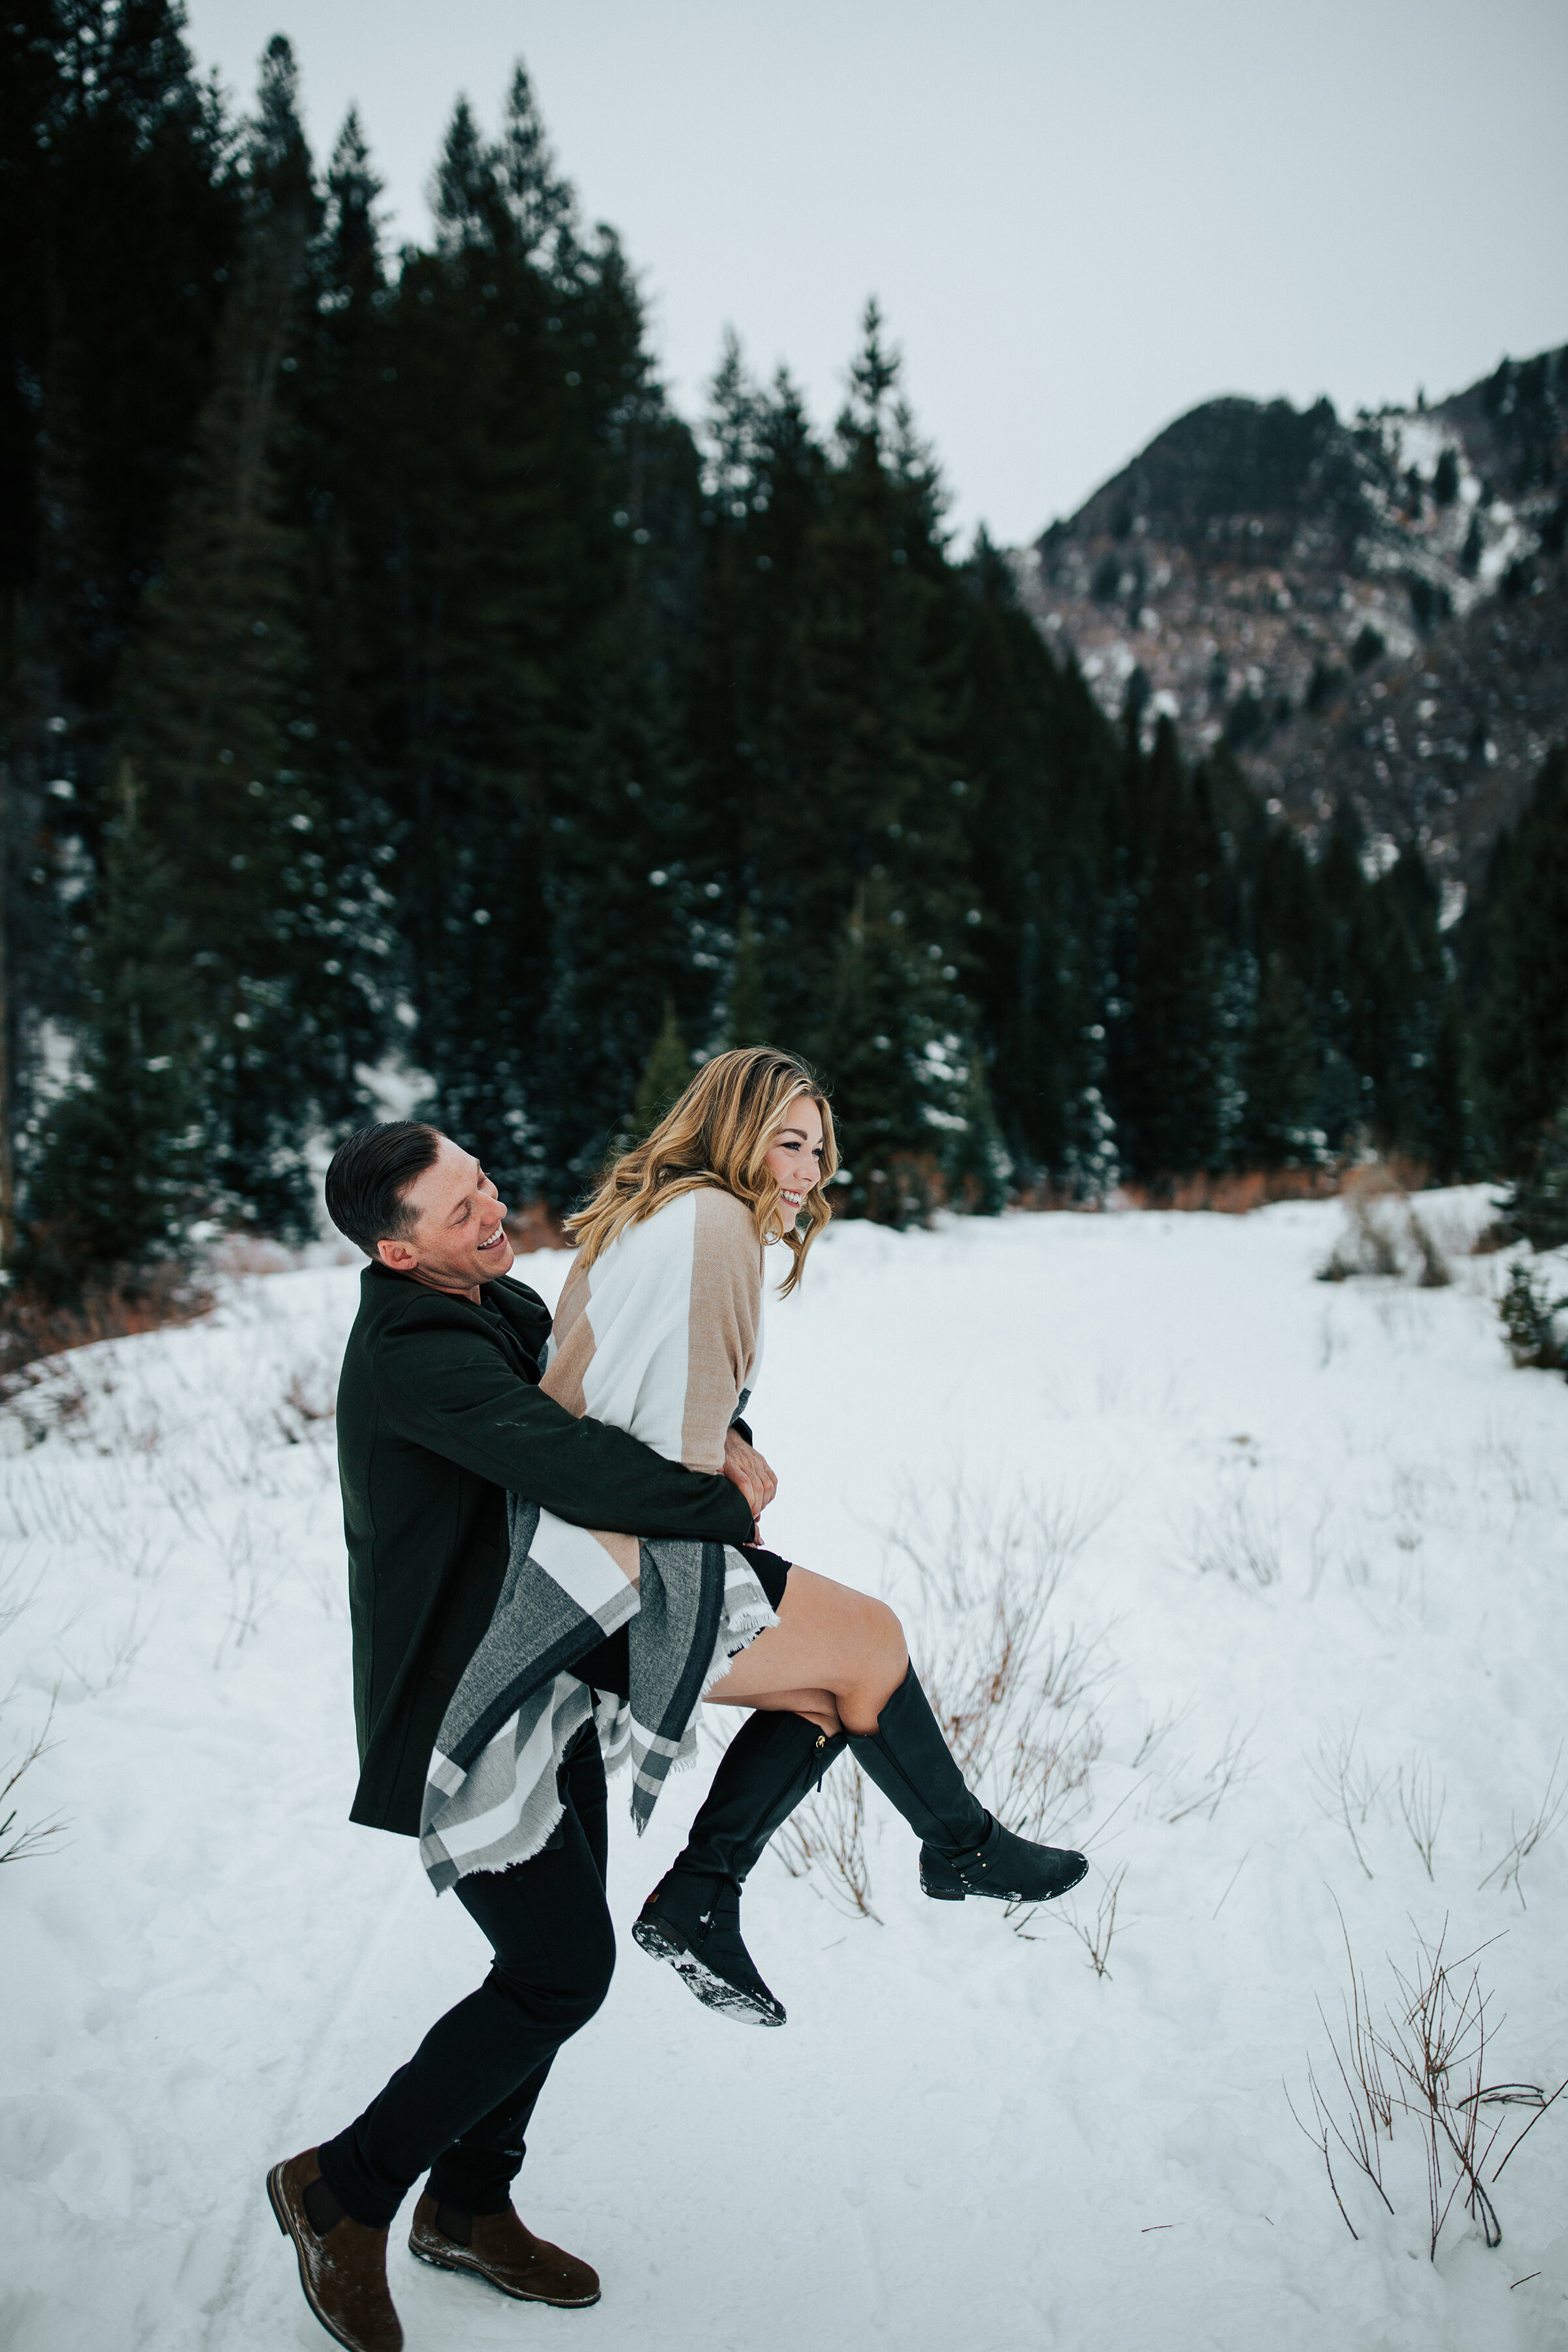  A playful couple romp in the snow in a winter engagement session by Emily Jenkins Photography.  Playful couple pose inspiration winter engagement session attire inspiration ideas and goals winter engagement couple goals women’s winter attire goals w